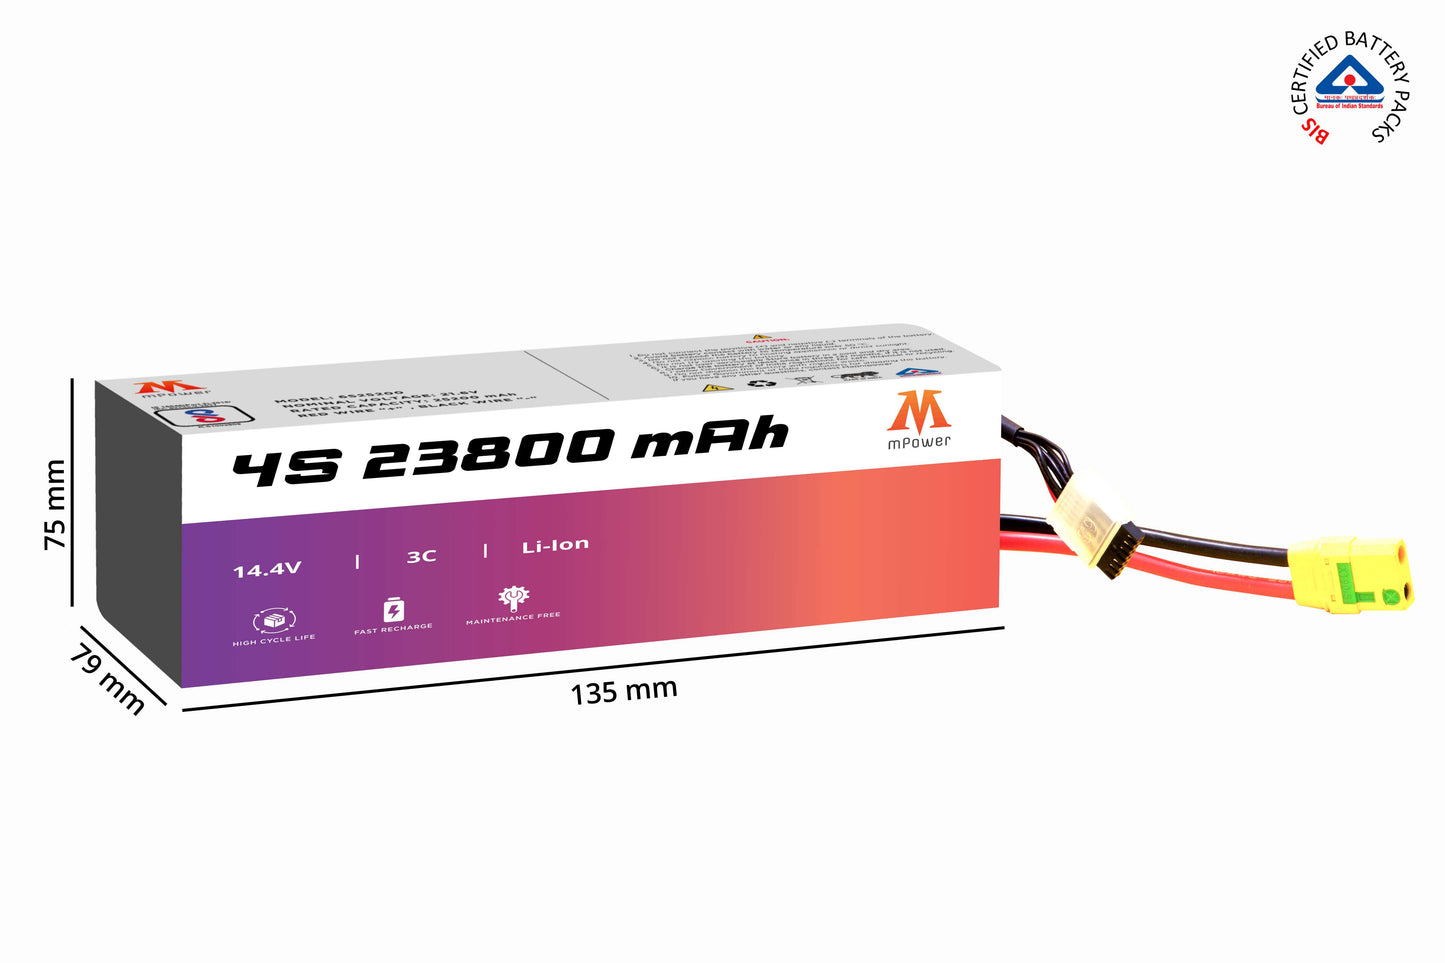 mPower 4S 23800mAh Lithium-Ion Battery for Surveillance Drones